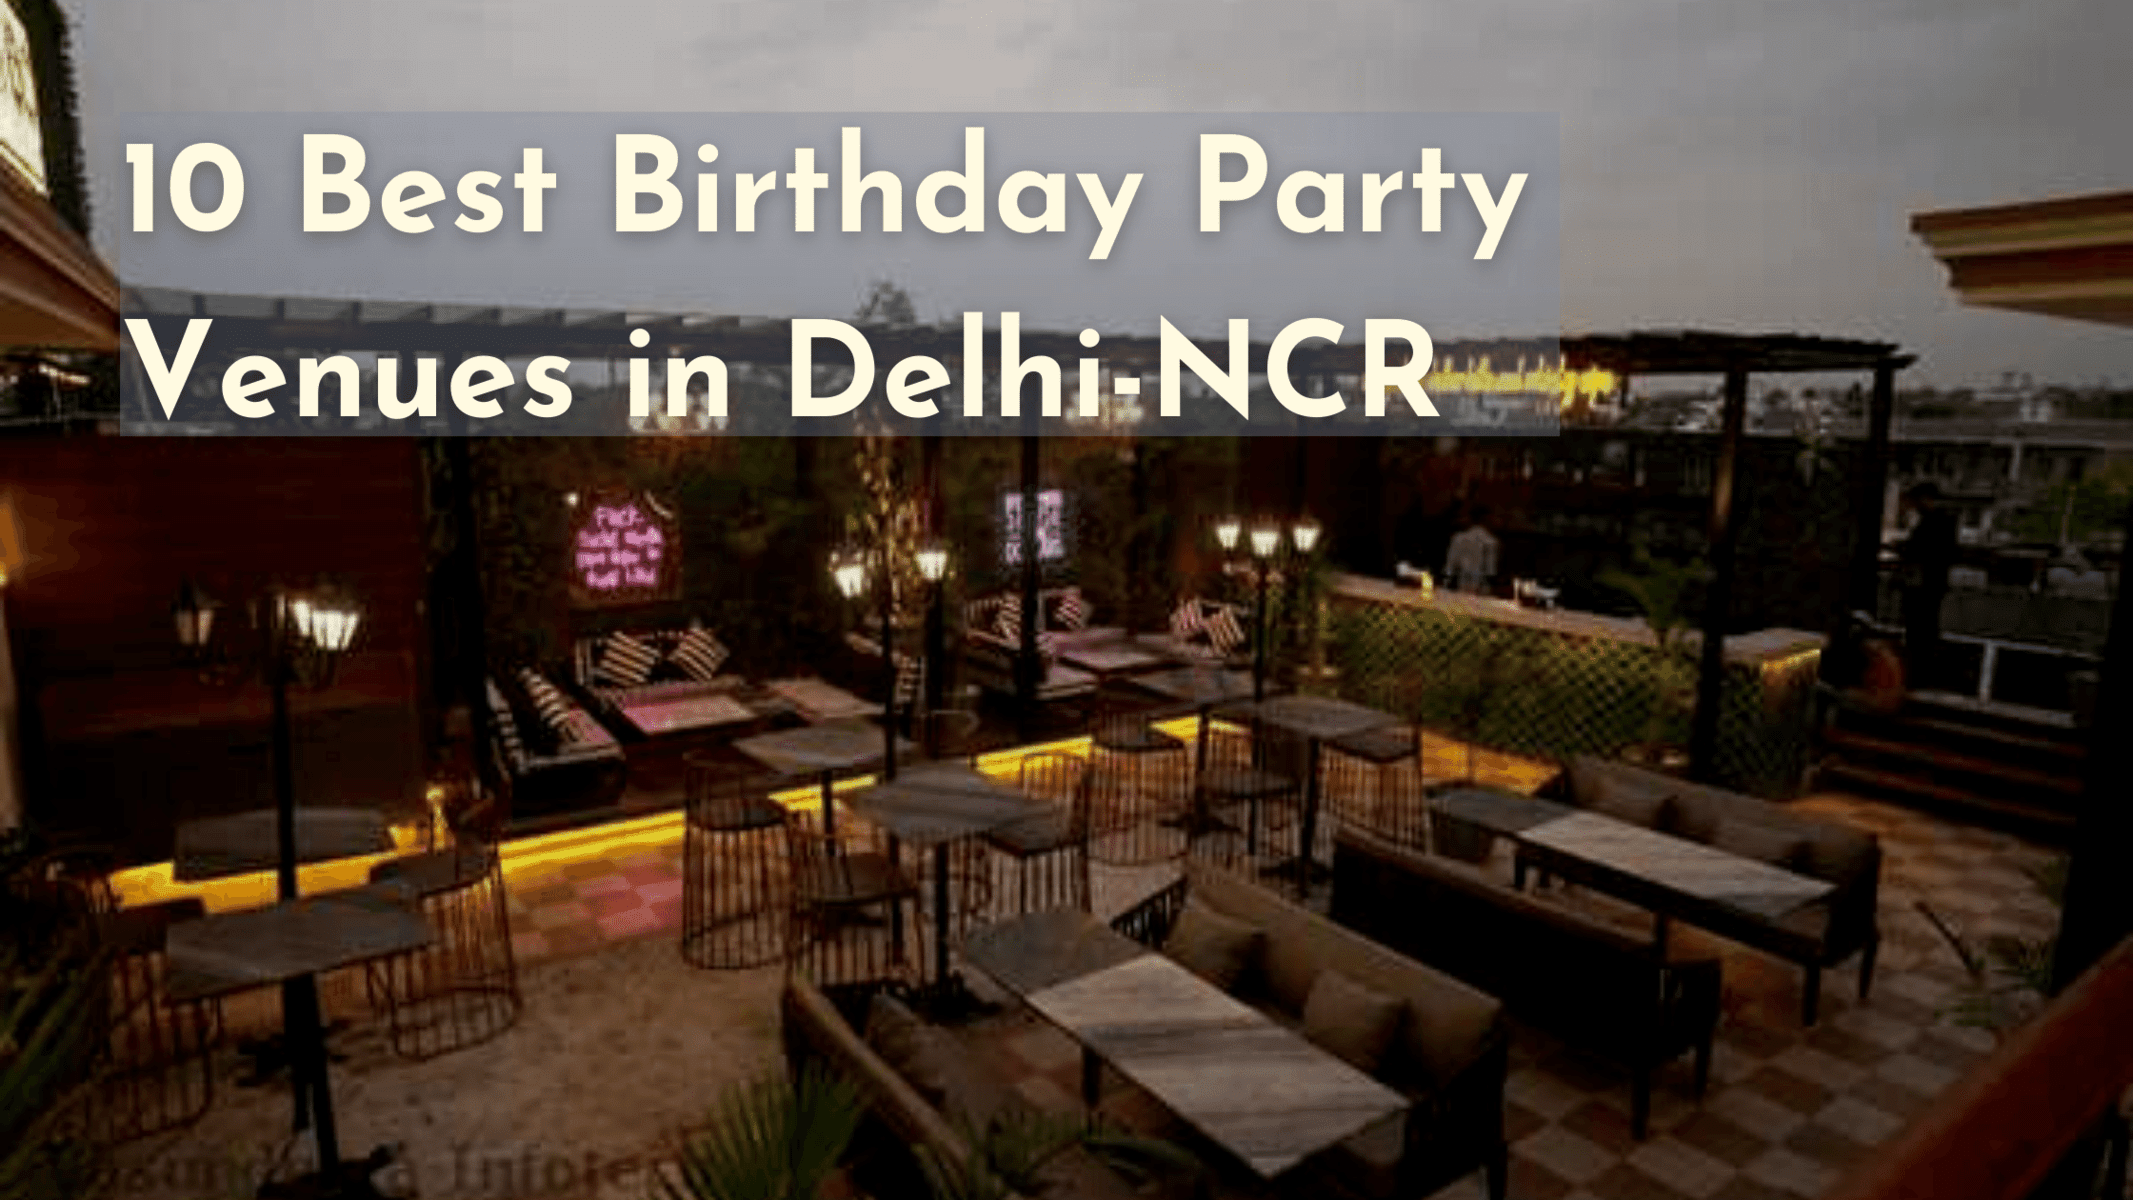 birthday party venue featured image